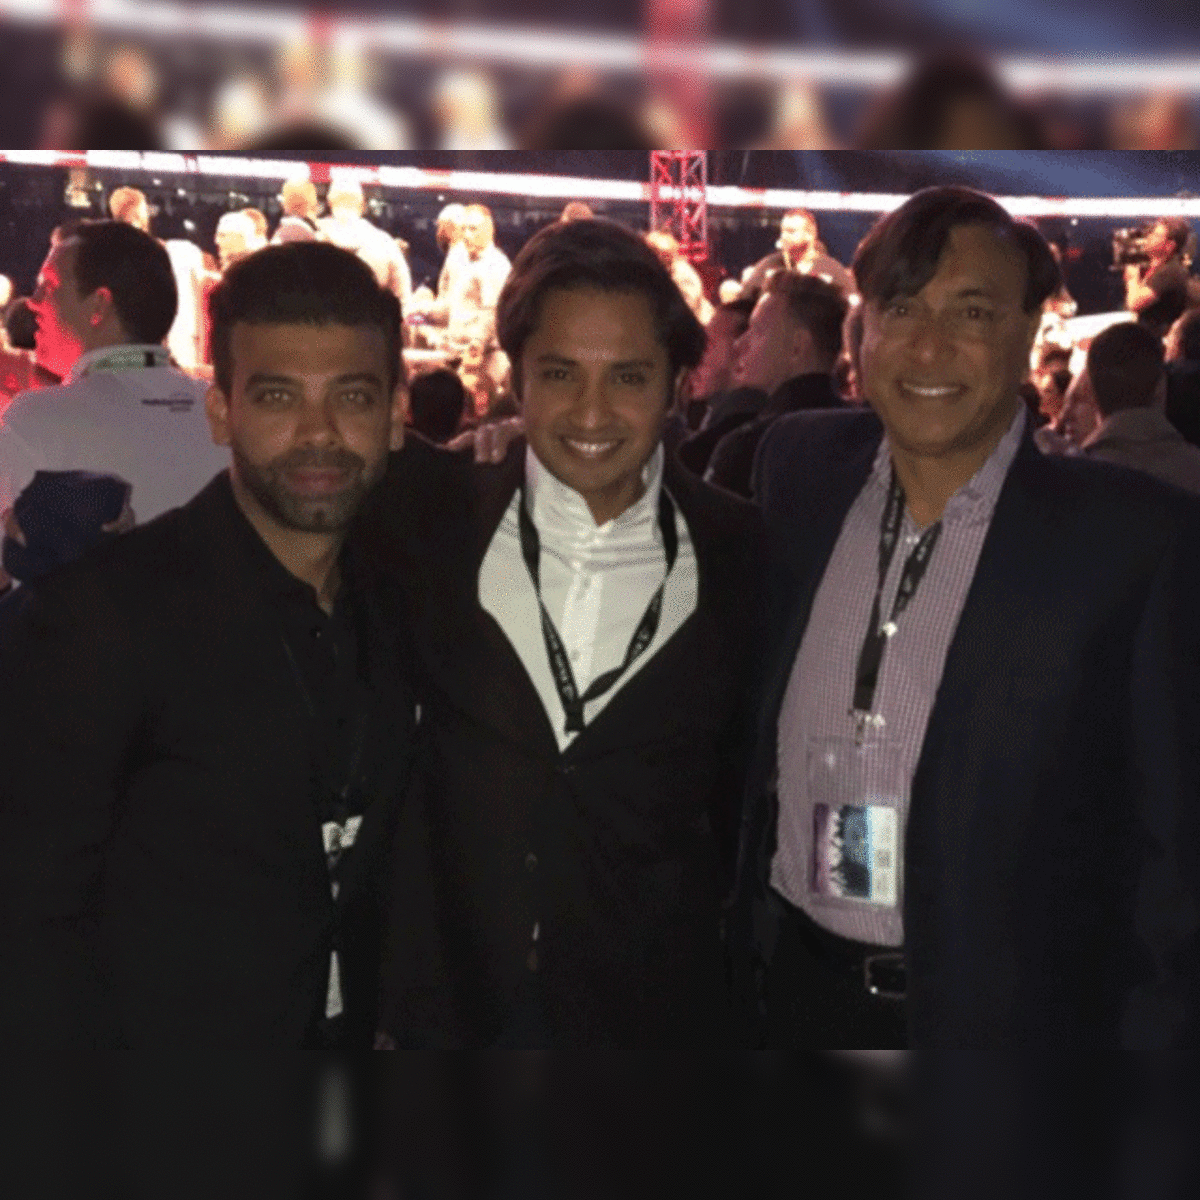 Lakshmi Mittal: Family night at the fight: Lakshmi Mittal hangs out with  son Aditya and son-in-law Amit Bhatia - The Economic Times